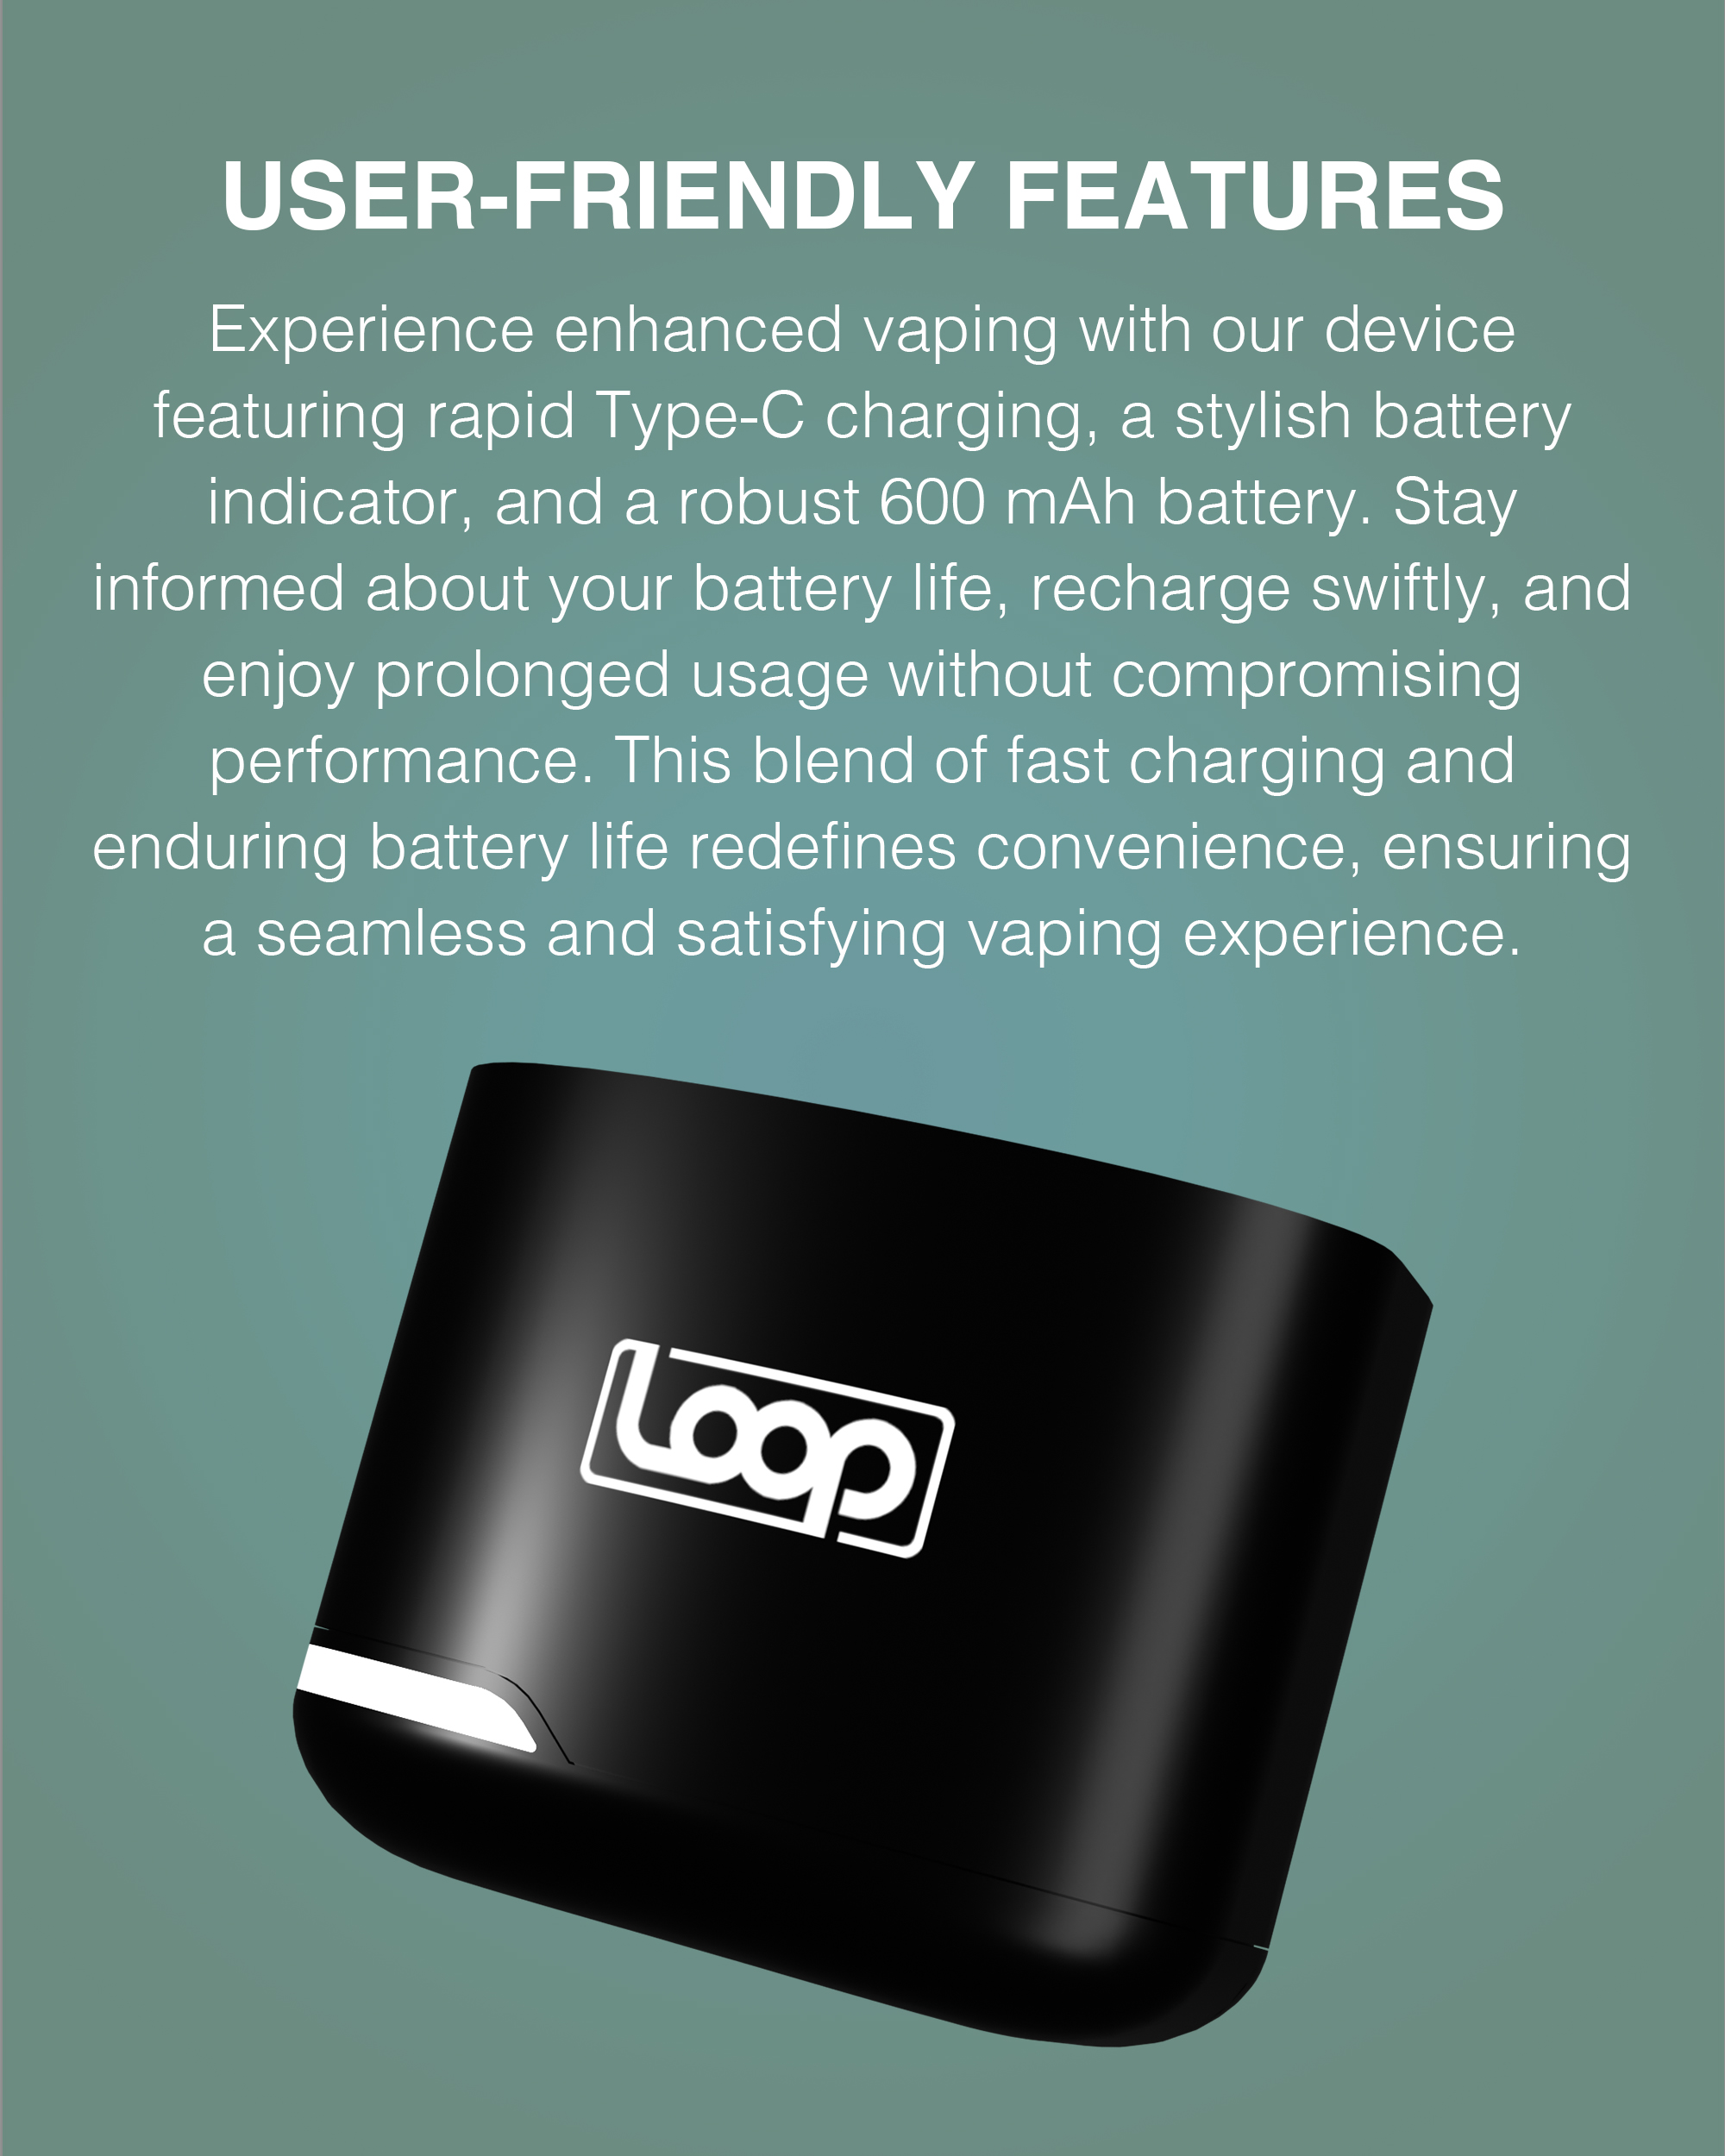 USER-FRIENDLY FEATURES: Experience enhanced vaping with our device featuring rapid Type-C charging, a stylish battery indicator, and a robust 600 mAh battery. Stay informed about your battery life, recharge swiftly, and enjoy prolonged usage without compromising performance. This blend of fast charging and enduring battery life redefines convenience, ensuring a seamless and satisfying vaping experience.